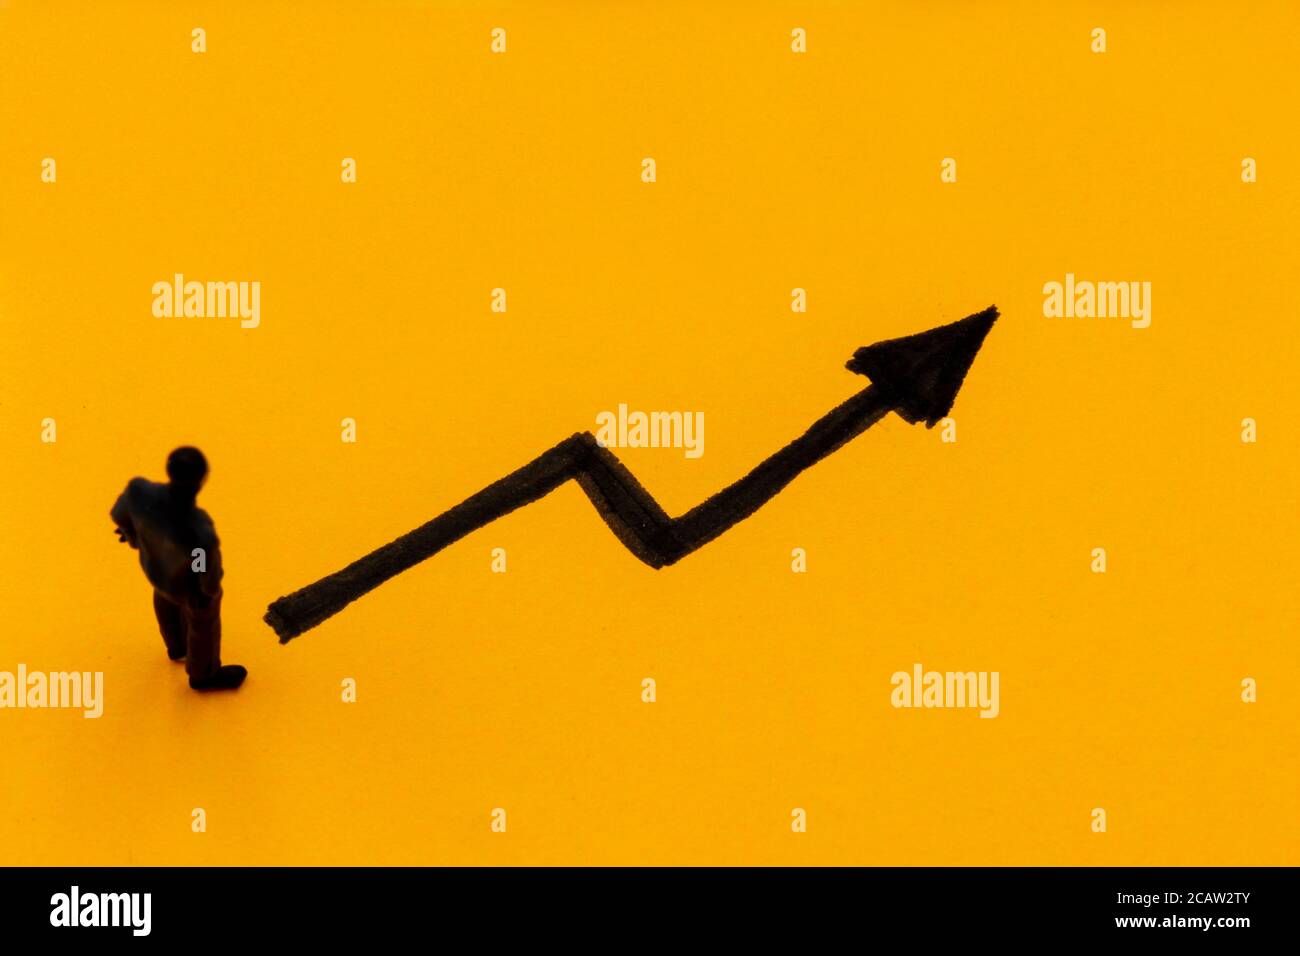 Miniature figurine posed as businessman in front of ascending graph arrow, positive performance concept image Stock Photo